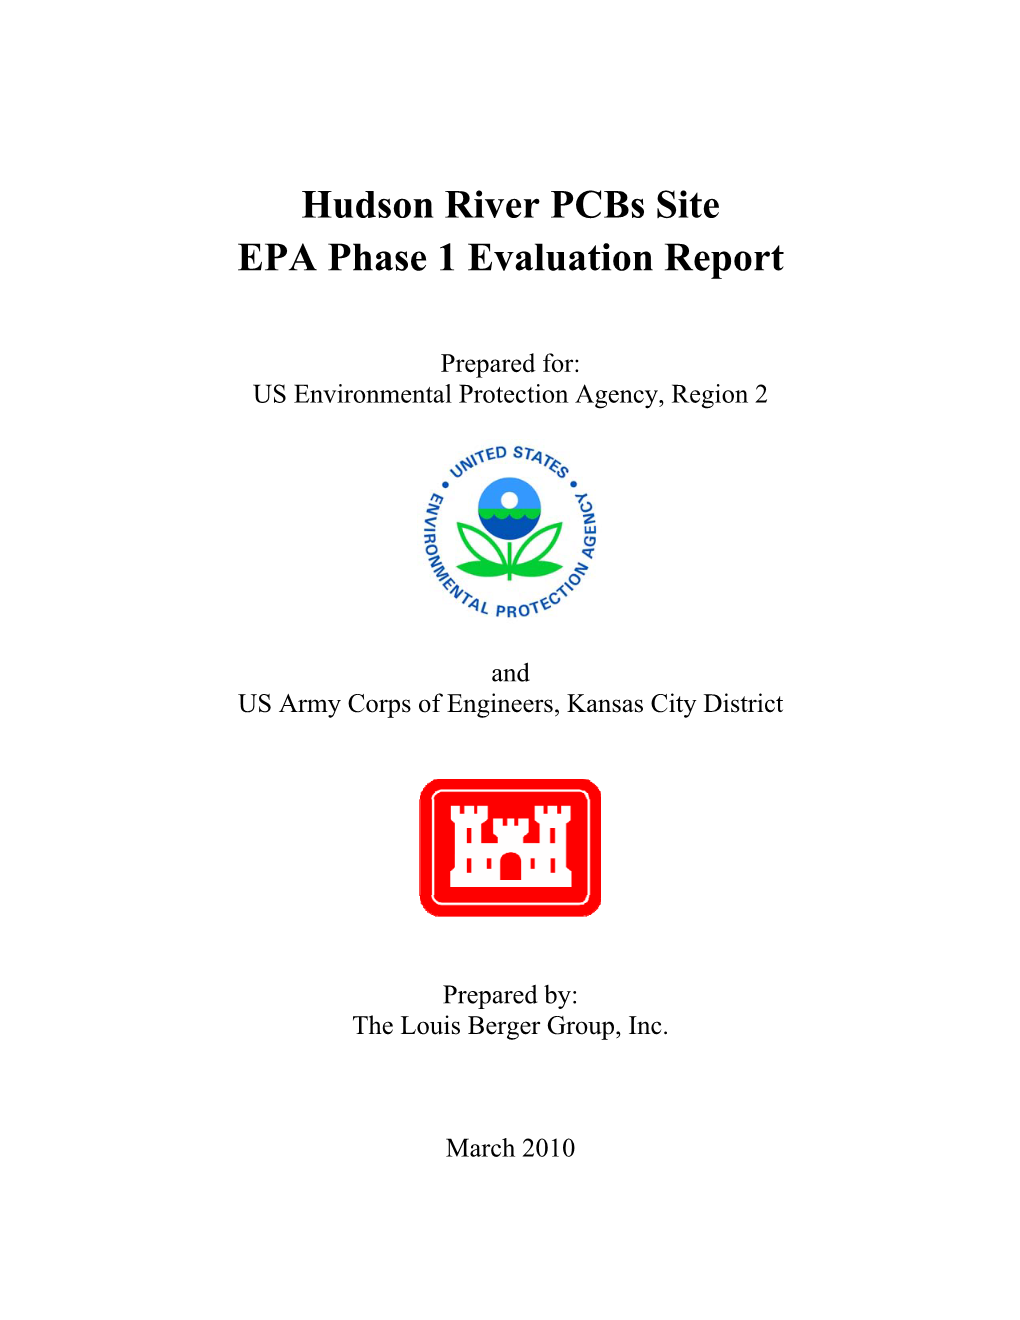 Hudson River Pcbs Site EPA Phase 1 Evaluation Report